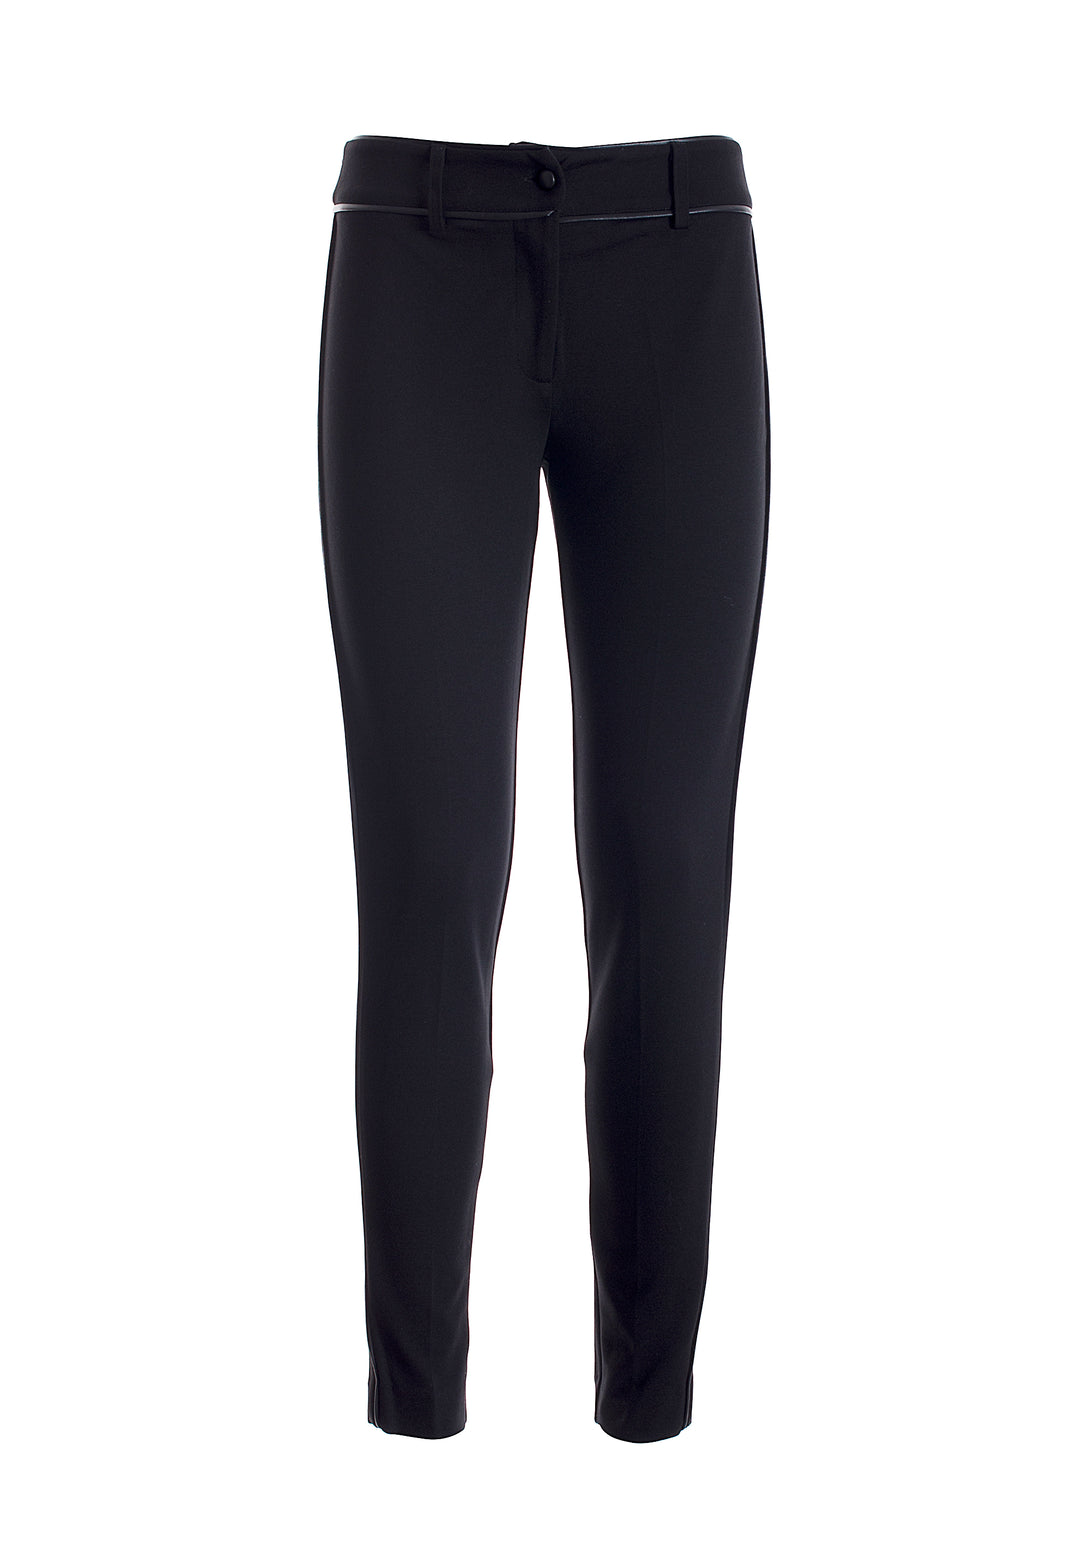 Pants super skinny fit made with super stretch fabric